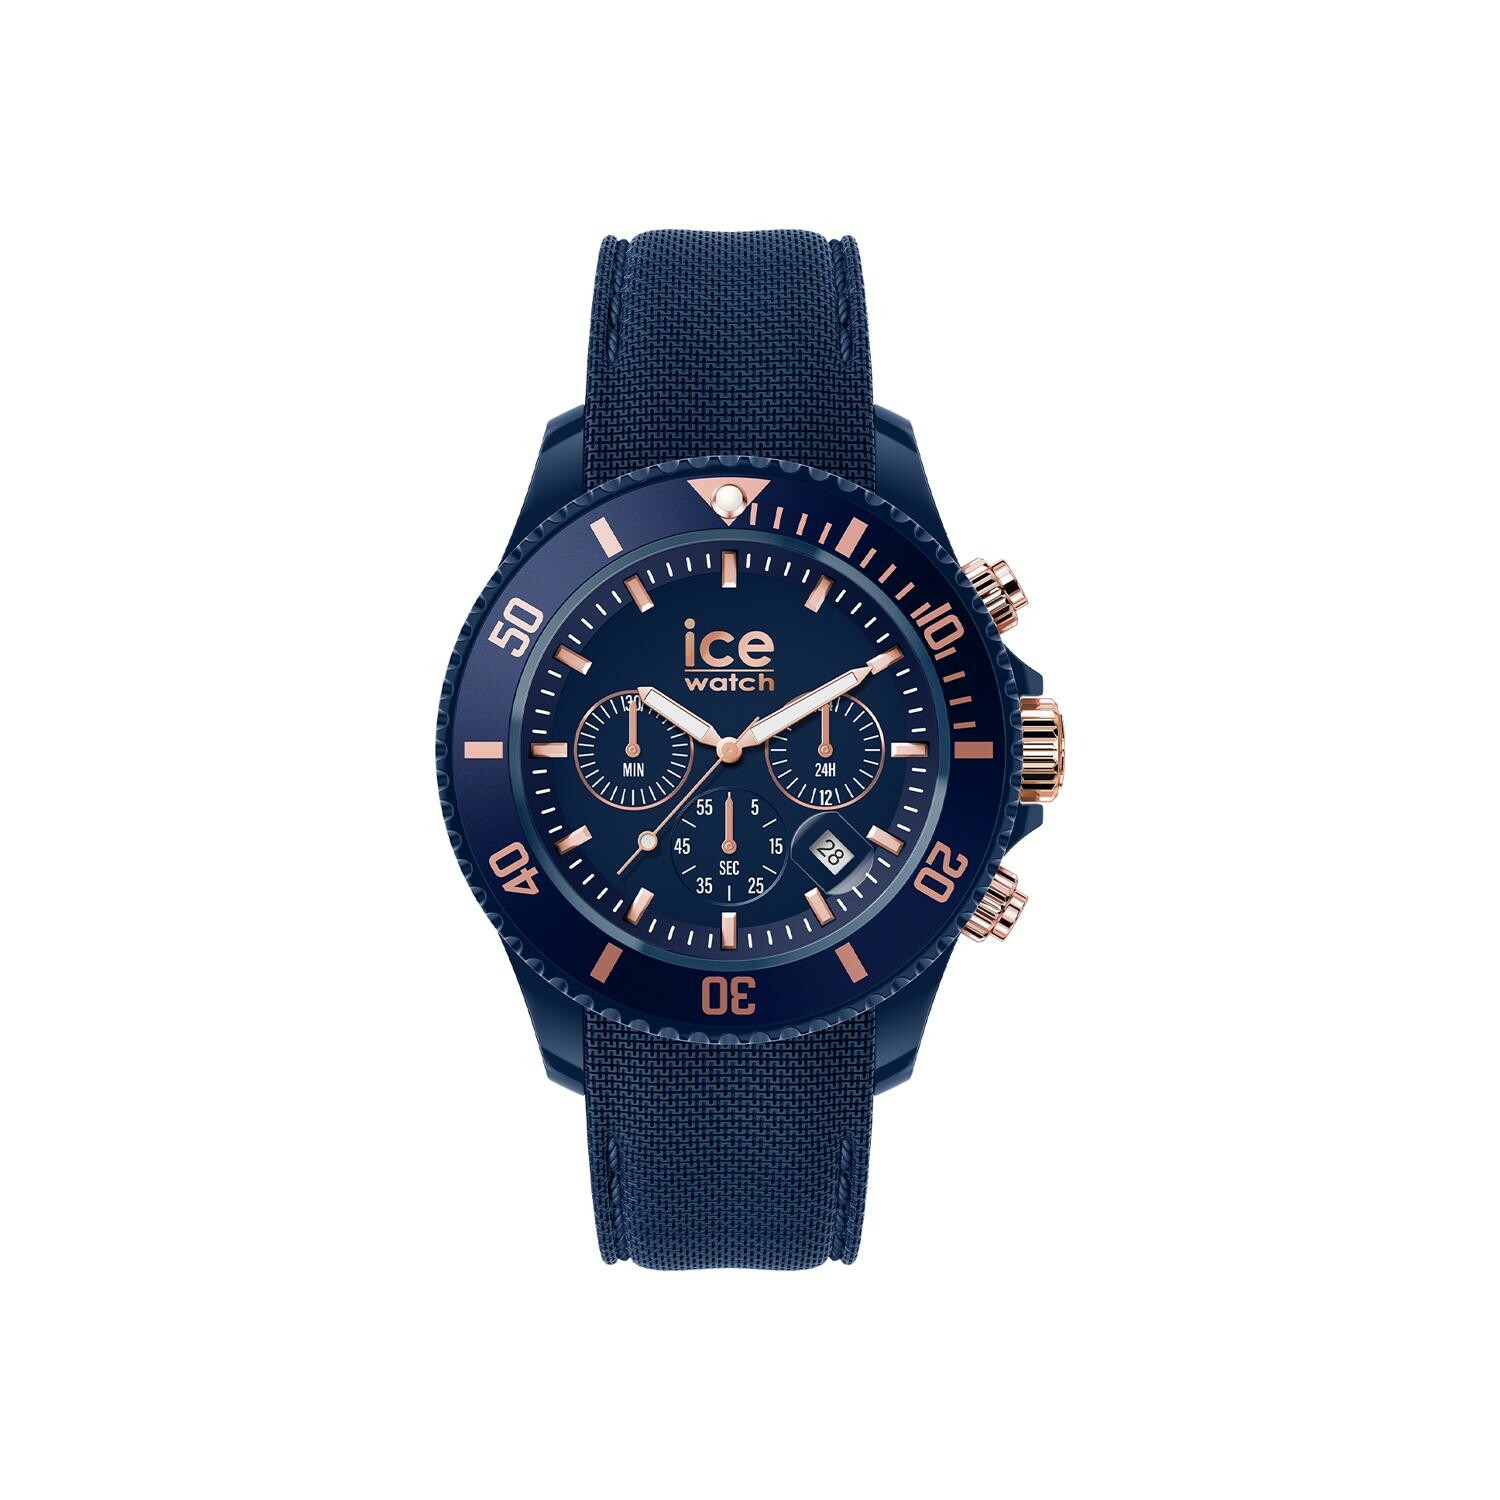 Achat Montre Ice Watch ICE chrono Blue rose-gold